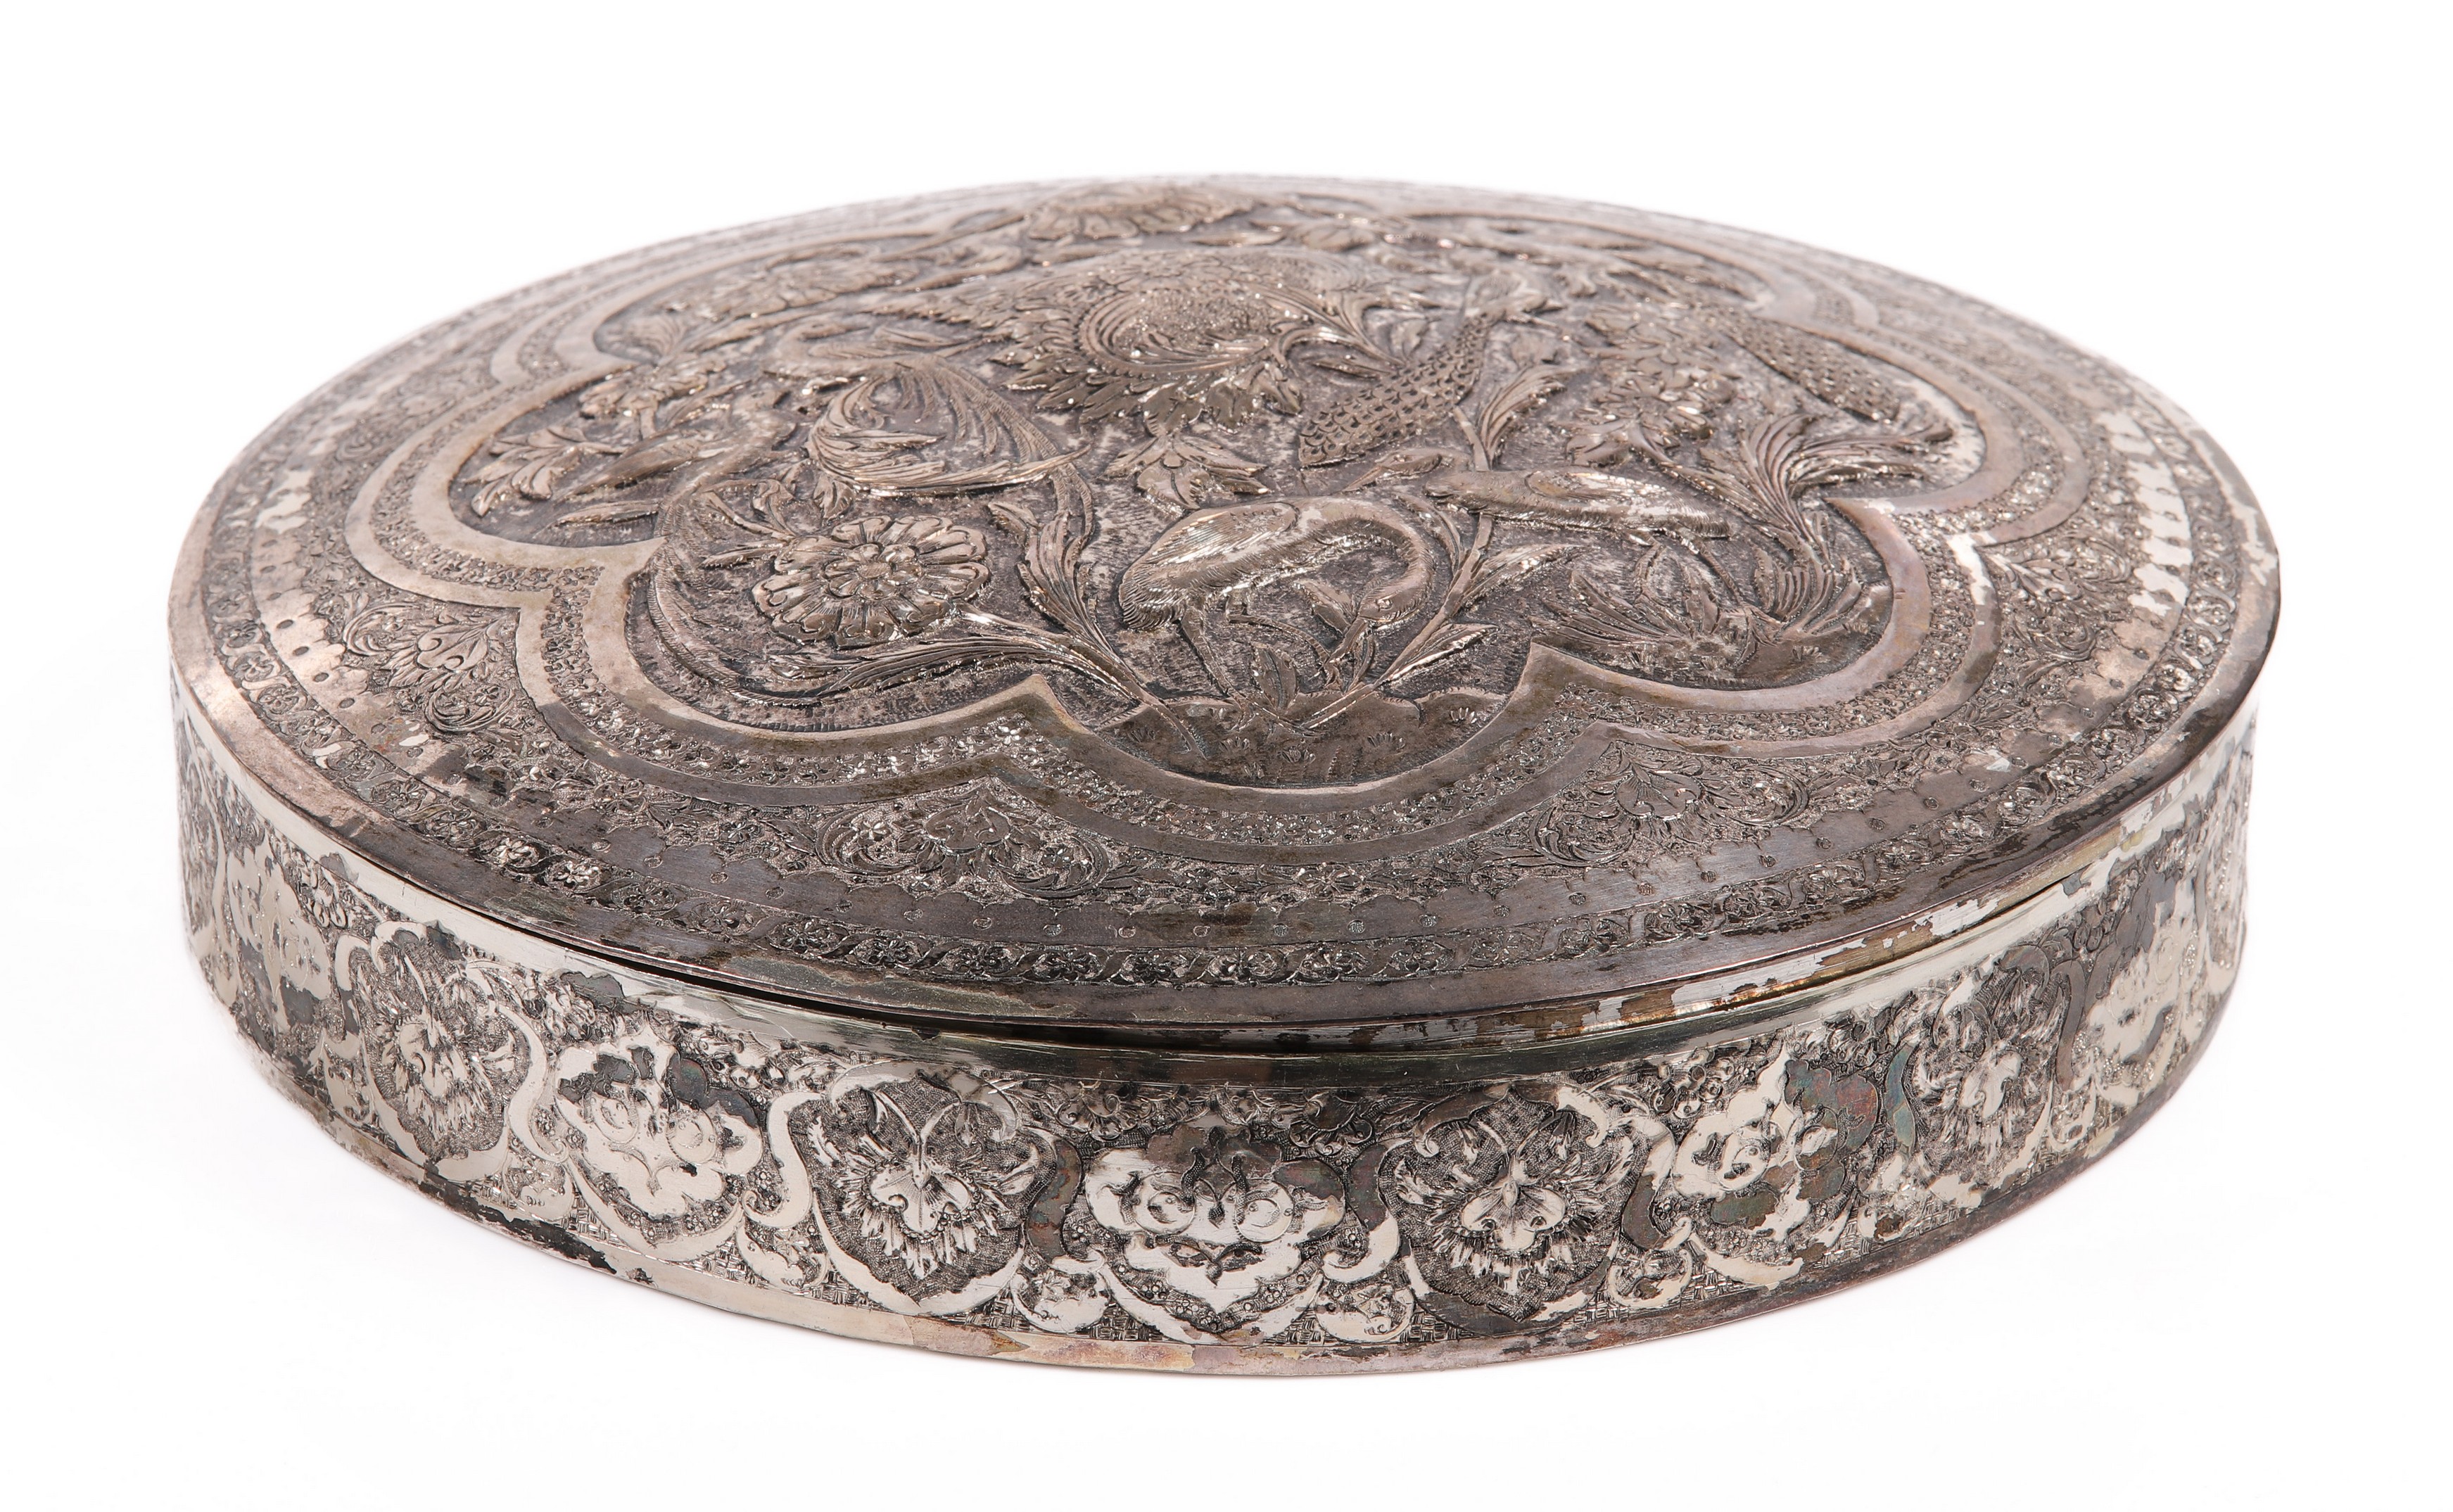 Persian silver repousse and engraved